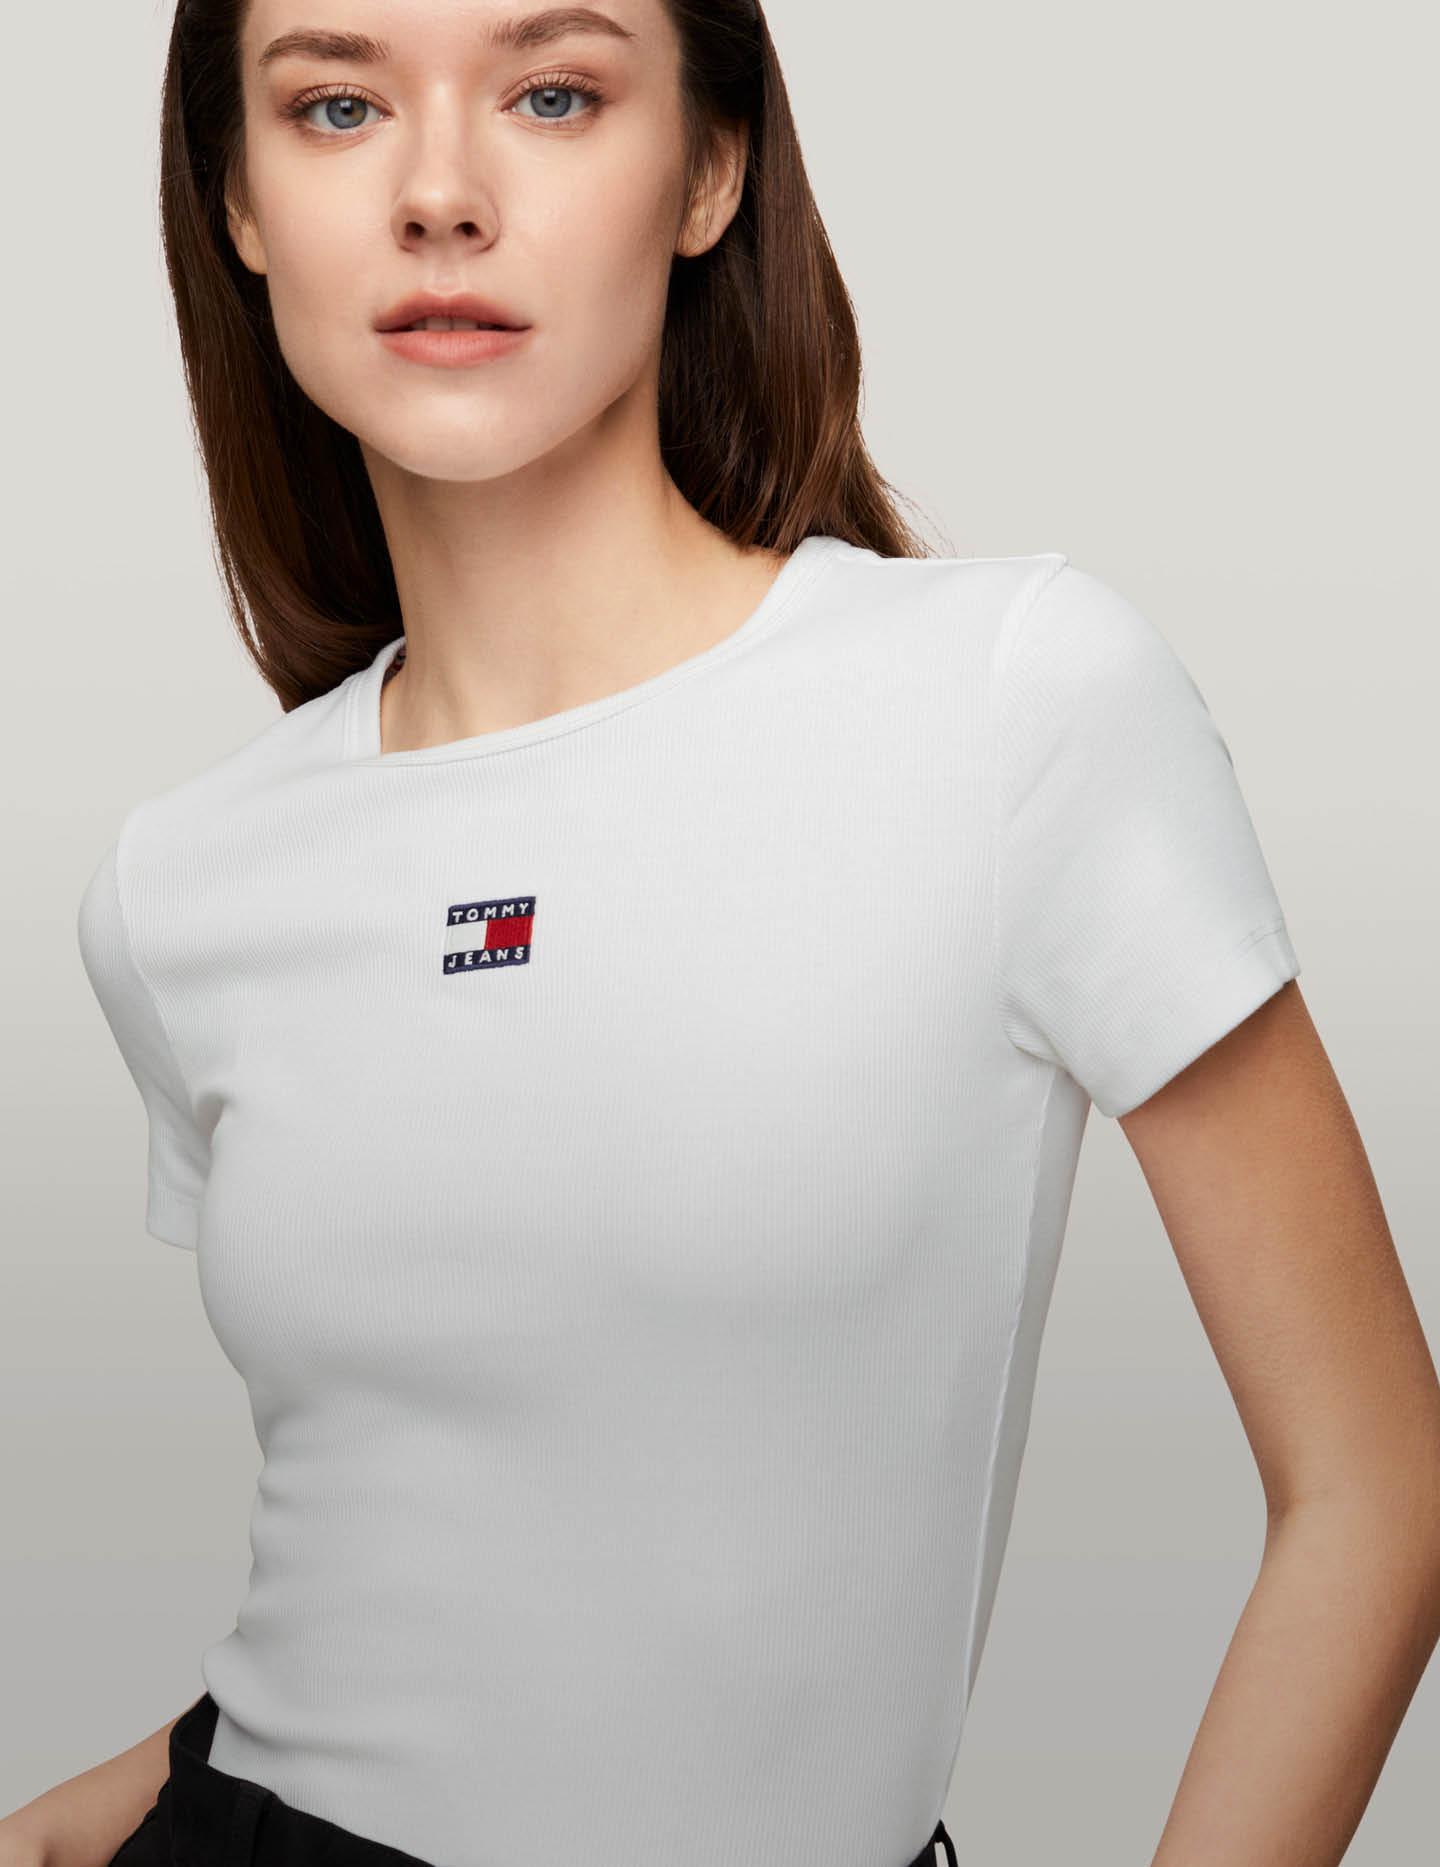 Tommy Hilfiger Women's Sale Tees Up to 50% Off